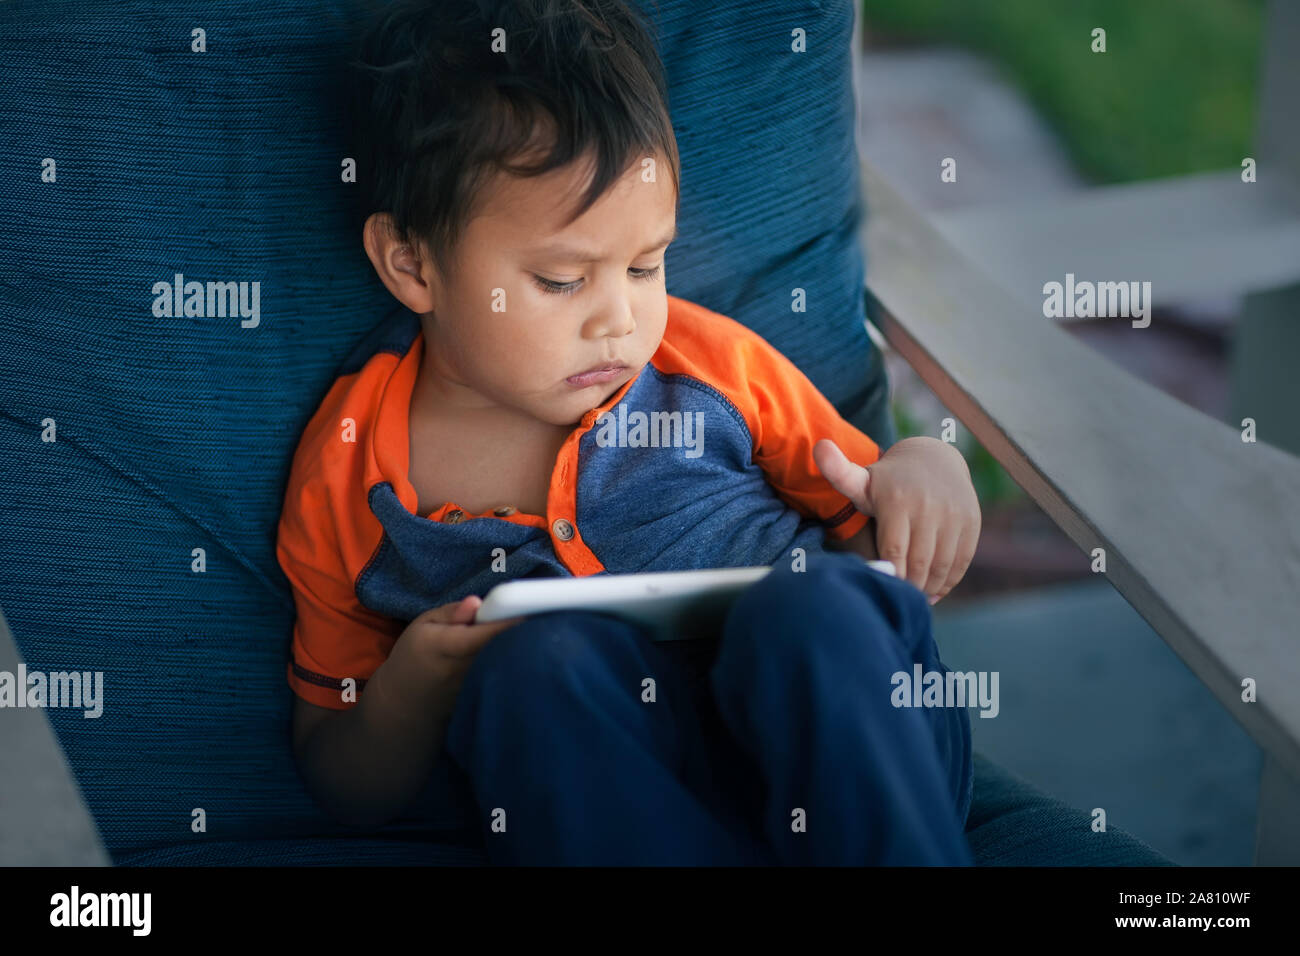 A little kid surfing the web without parental controls and looks disturbed. Stock Photo